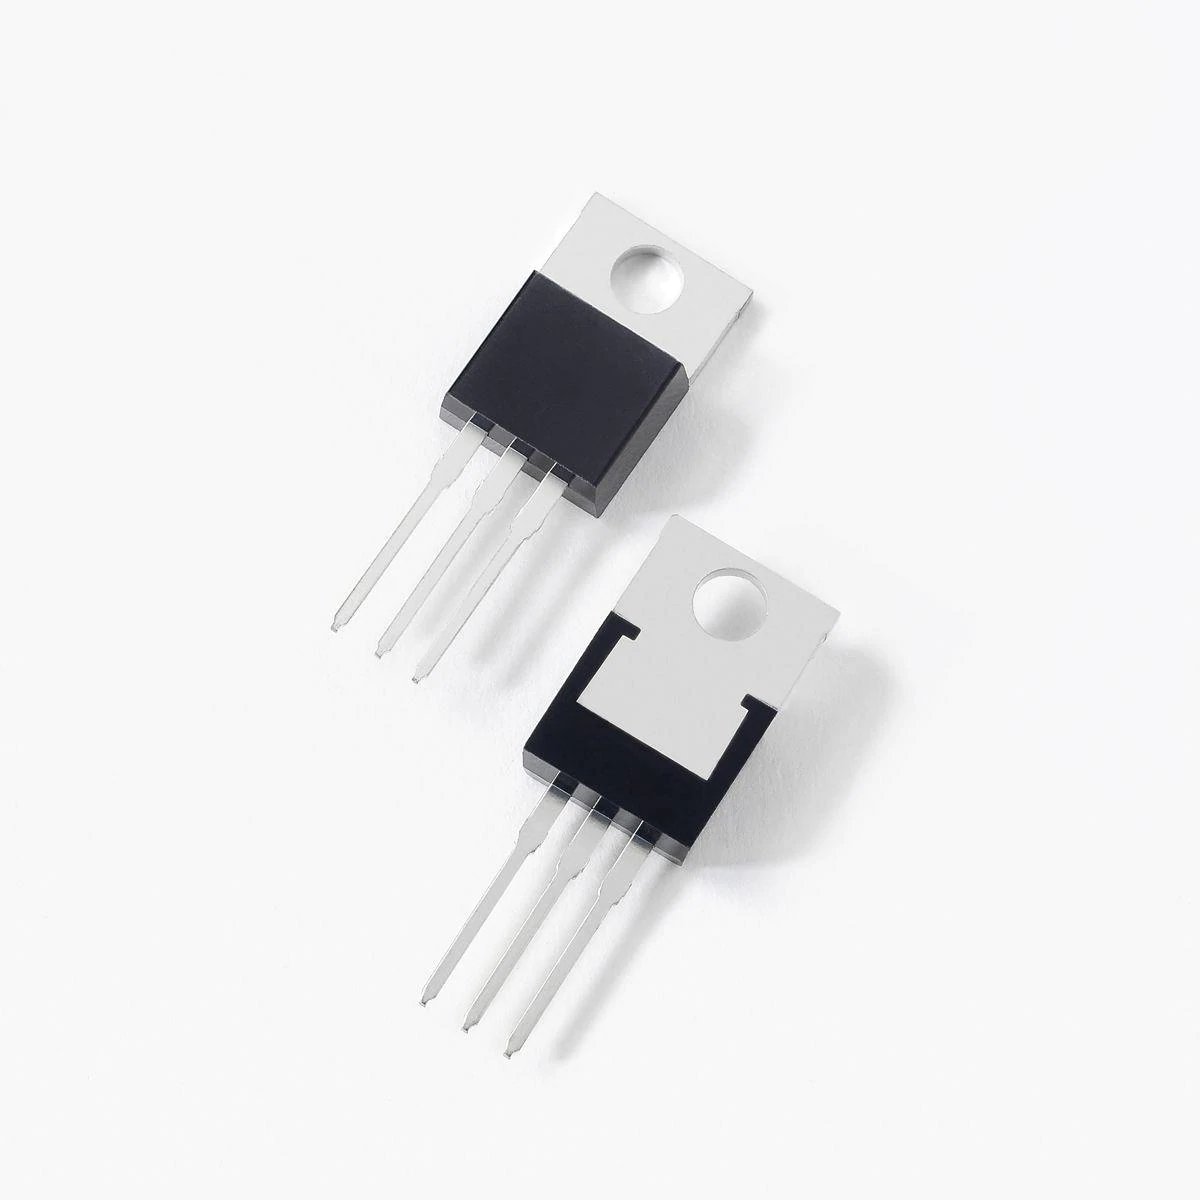 MC7812CTG - (7812CT) TO-220 12V 1A LINEAR VOLTAGE REGULATOR IC